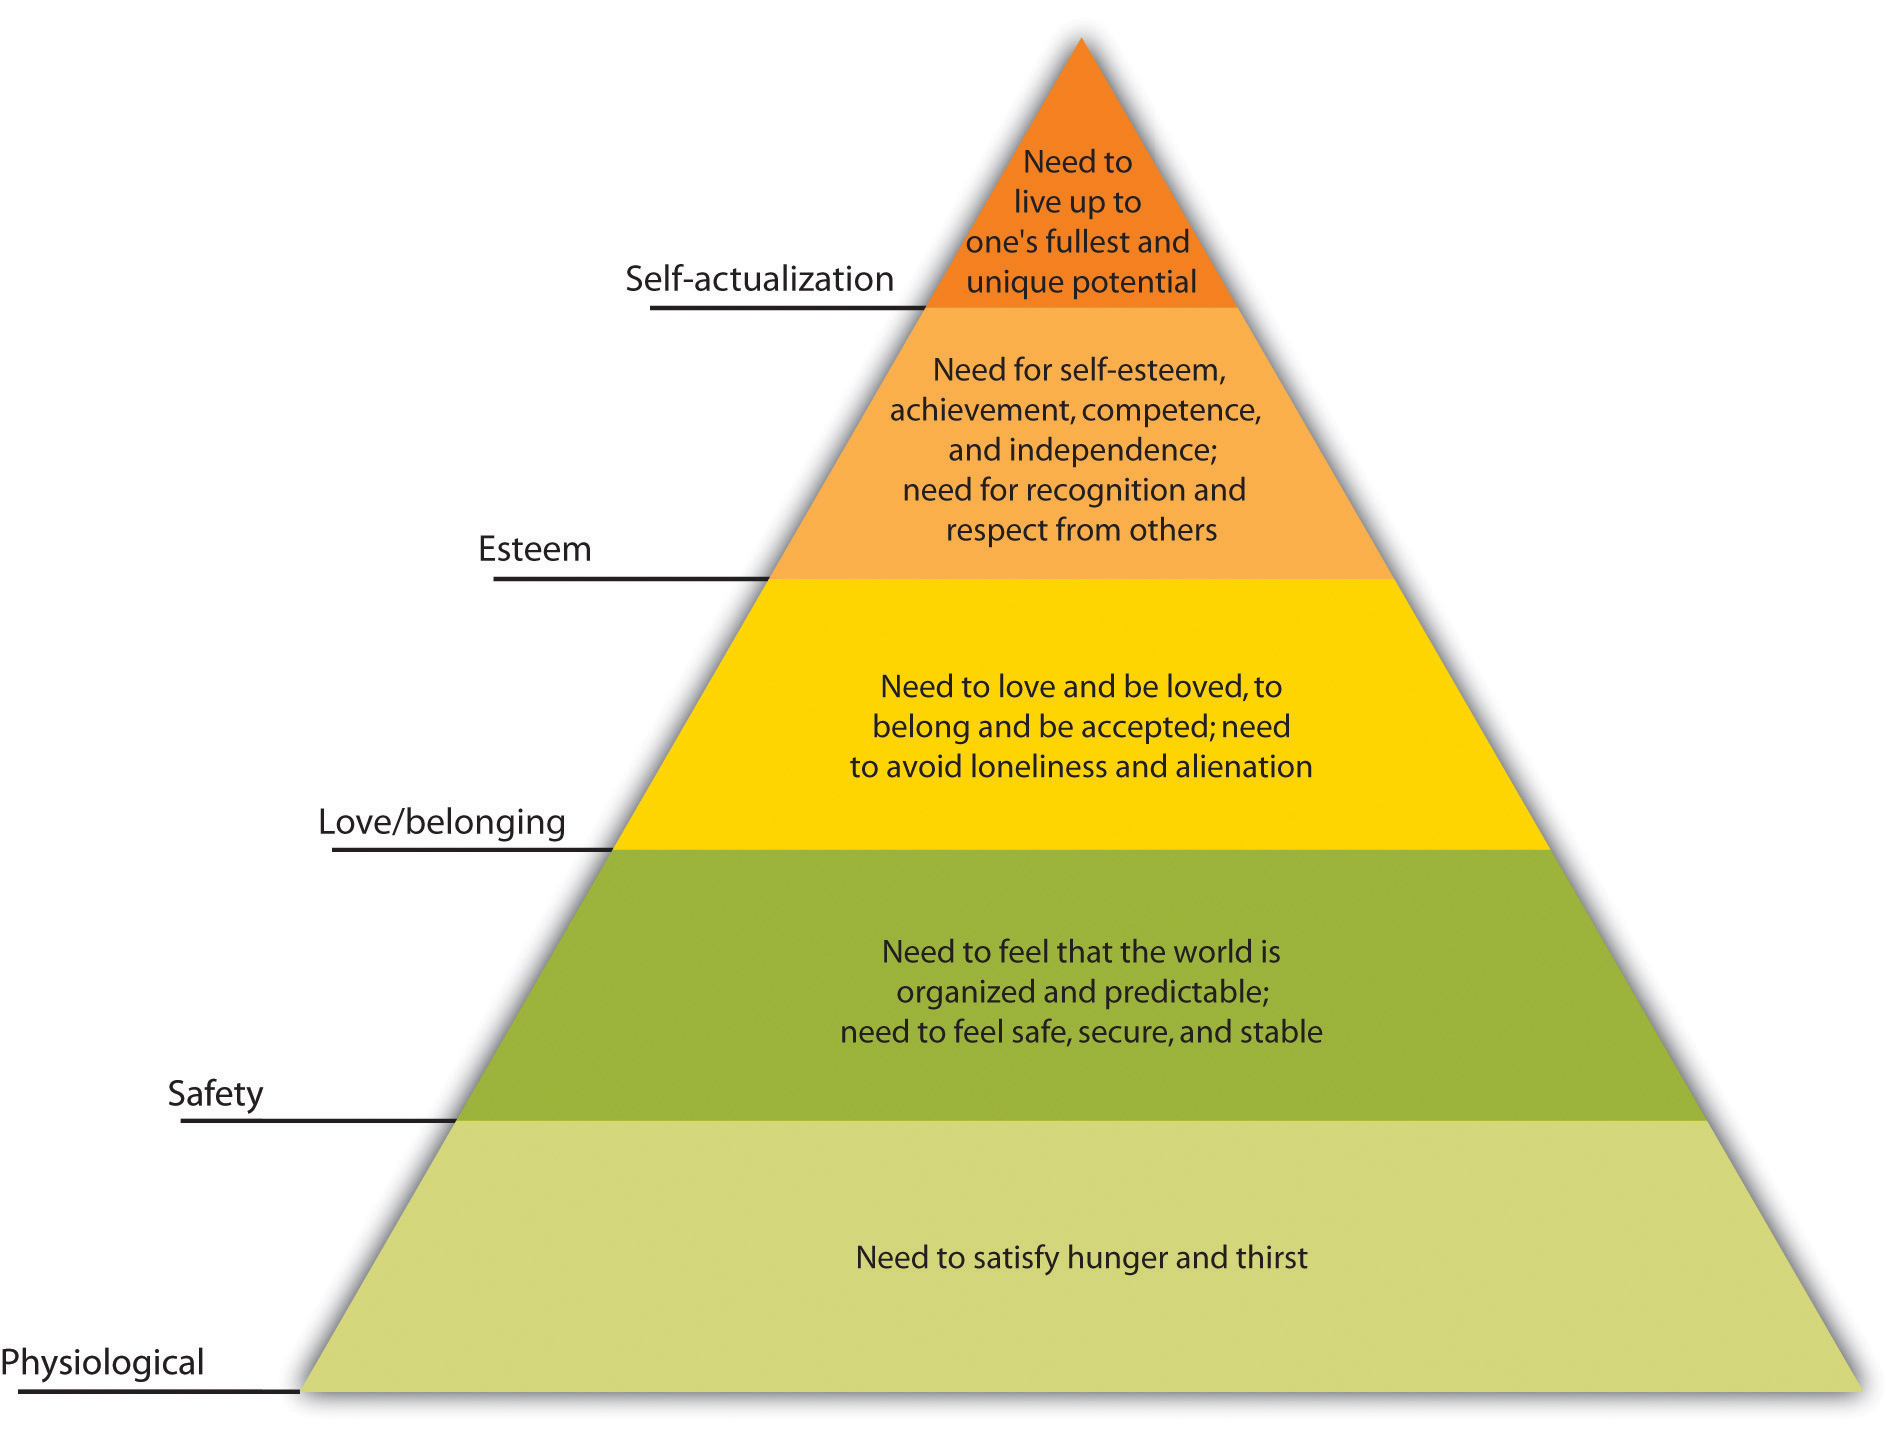 Maslow's Hierarchy of Needs. Long description available.